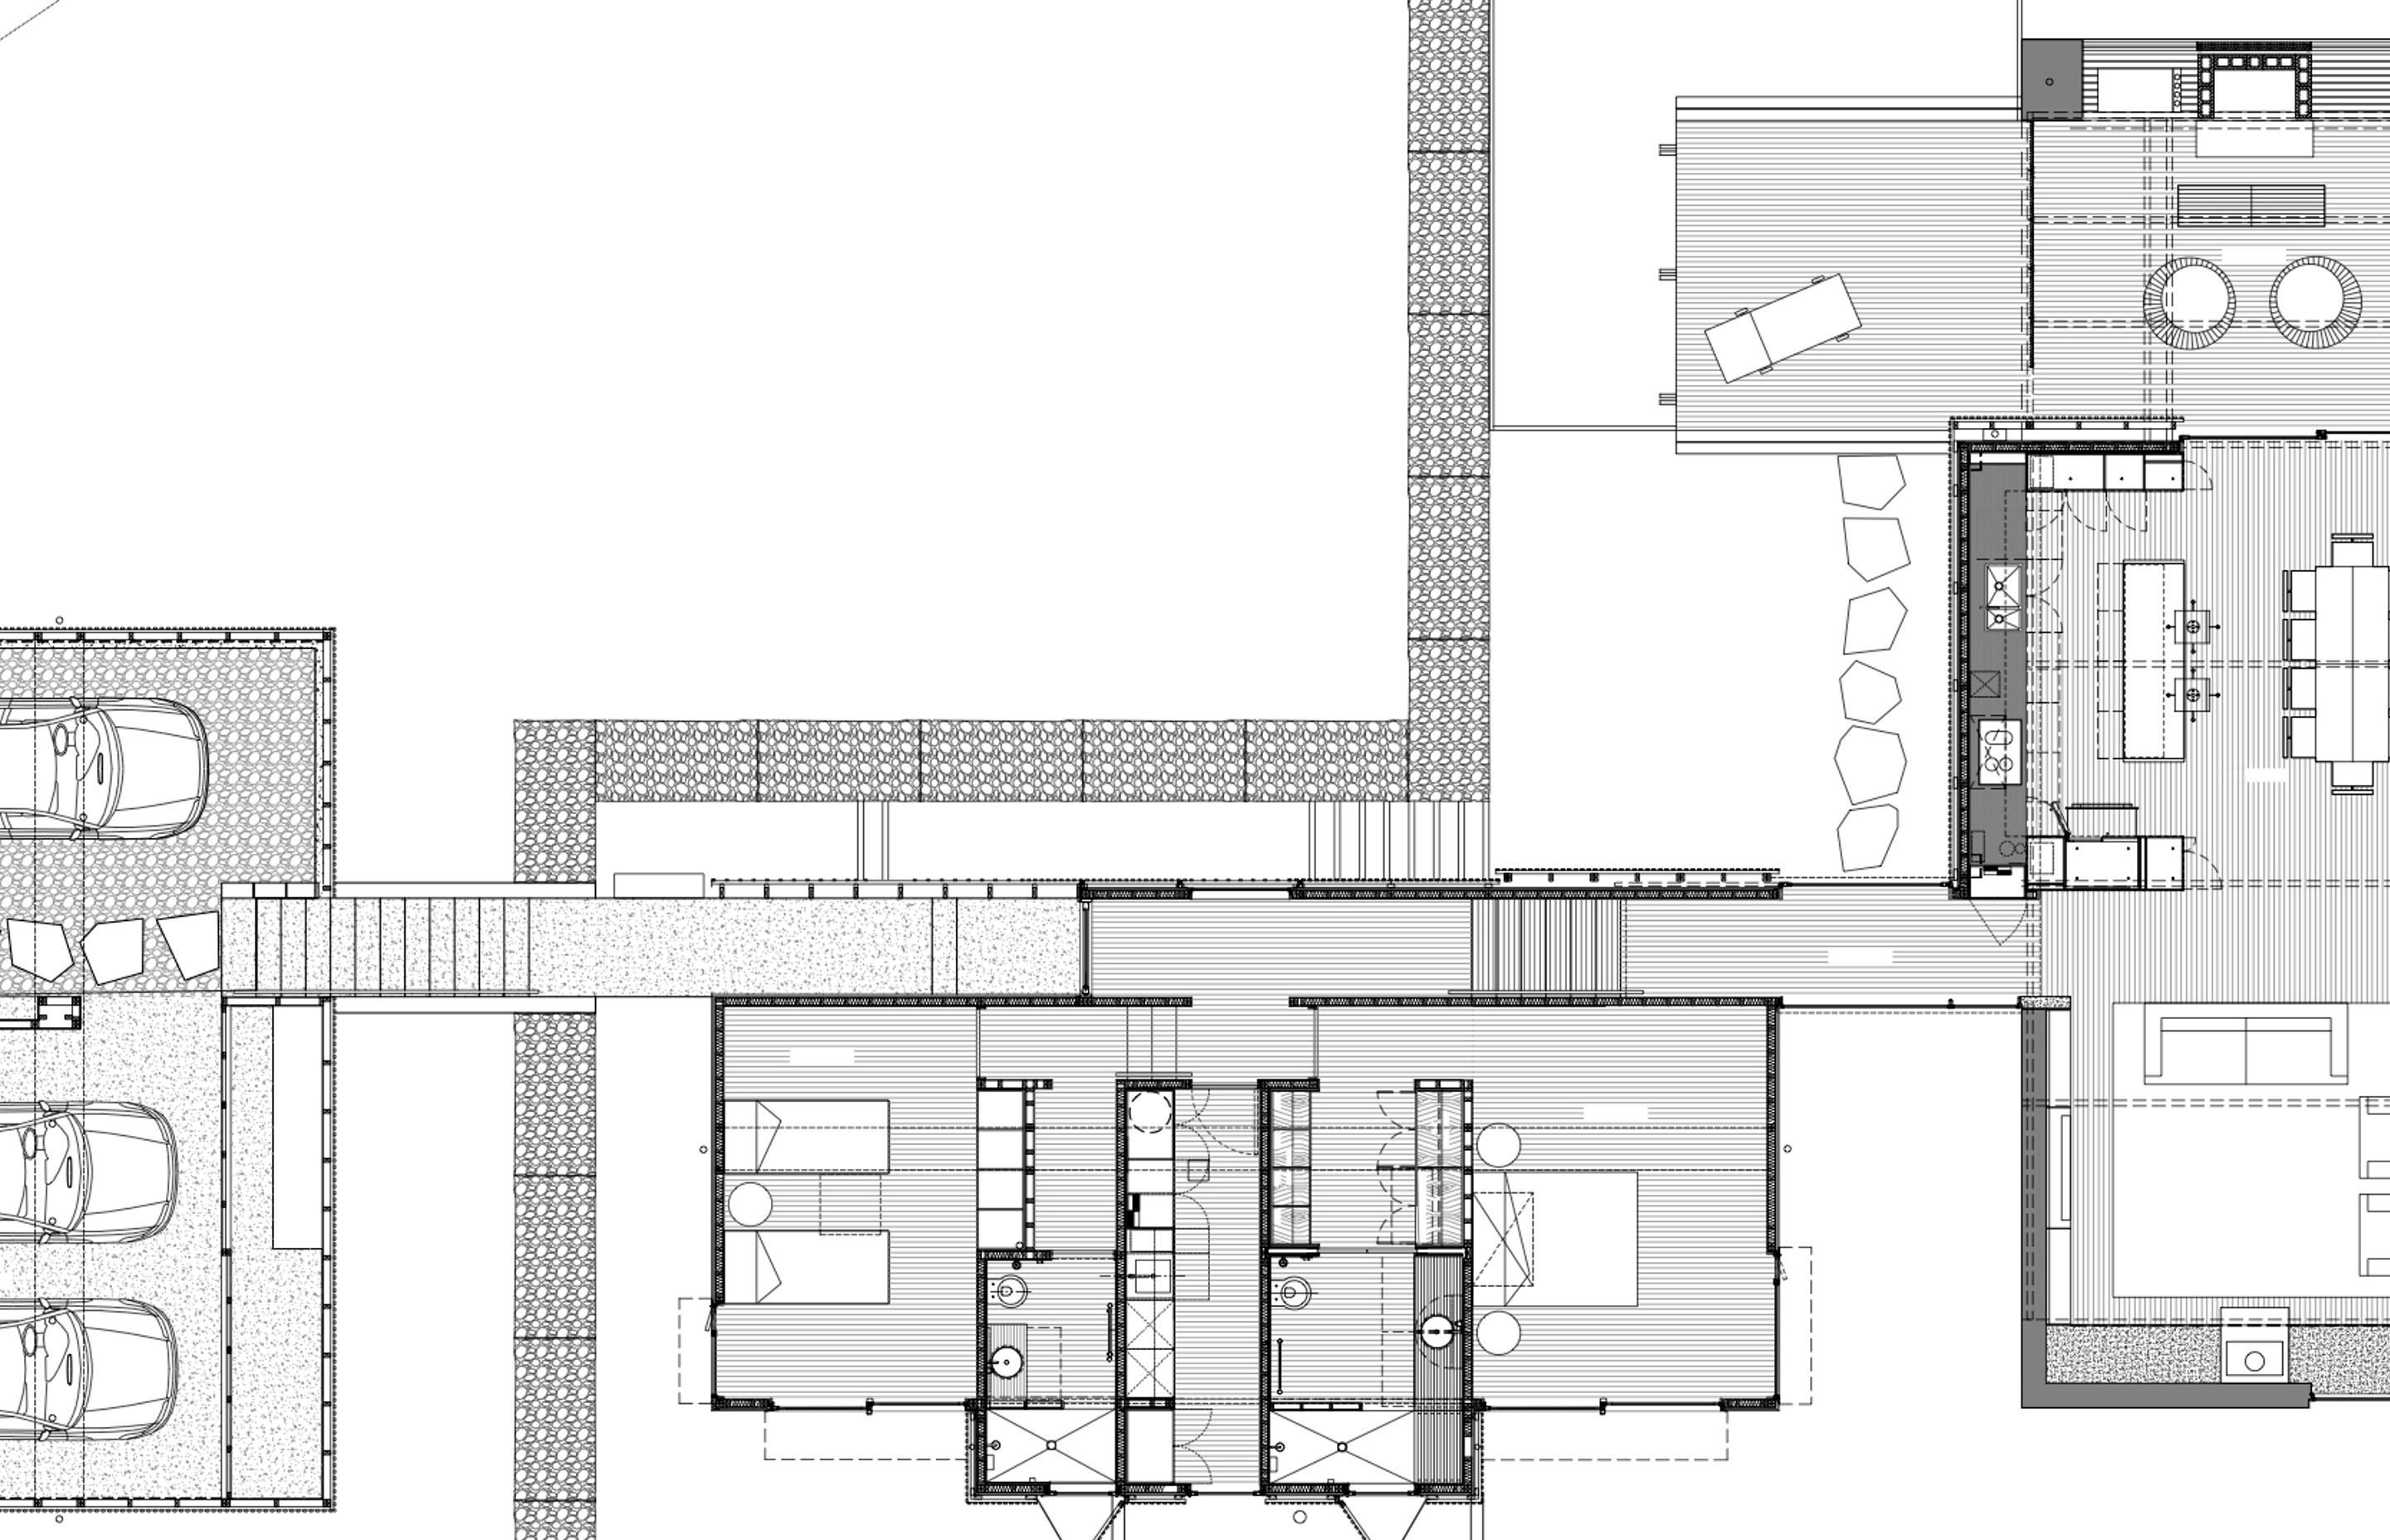 A site plan by Herbst Architects indicates the garage (left), the bedroom wing (middle), gubion retention walls, and the living spaces in the building (right), all connected by the 'spine'.